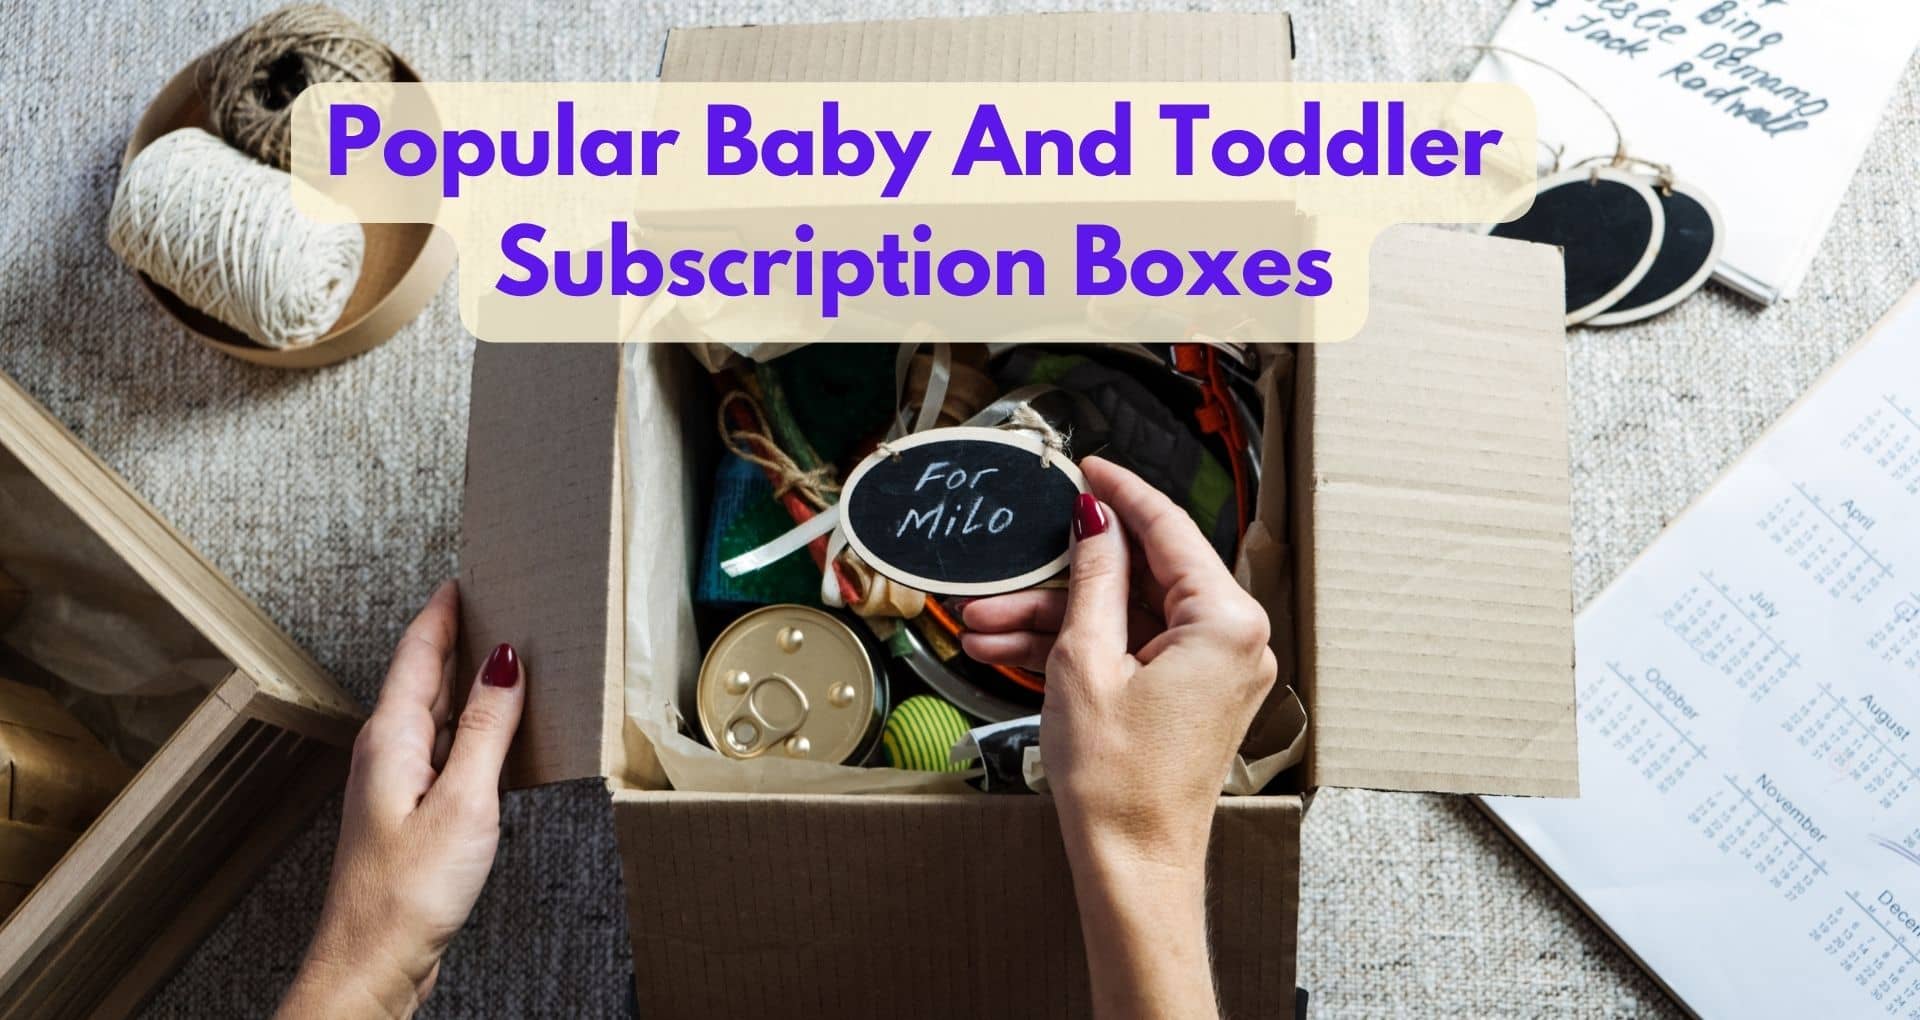 What Are Some Popular Baby And Toddler Subscription Boxes?